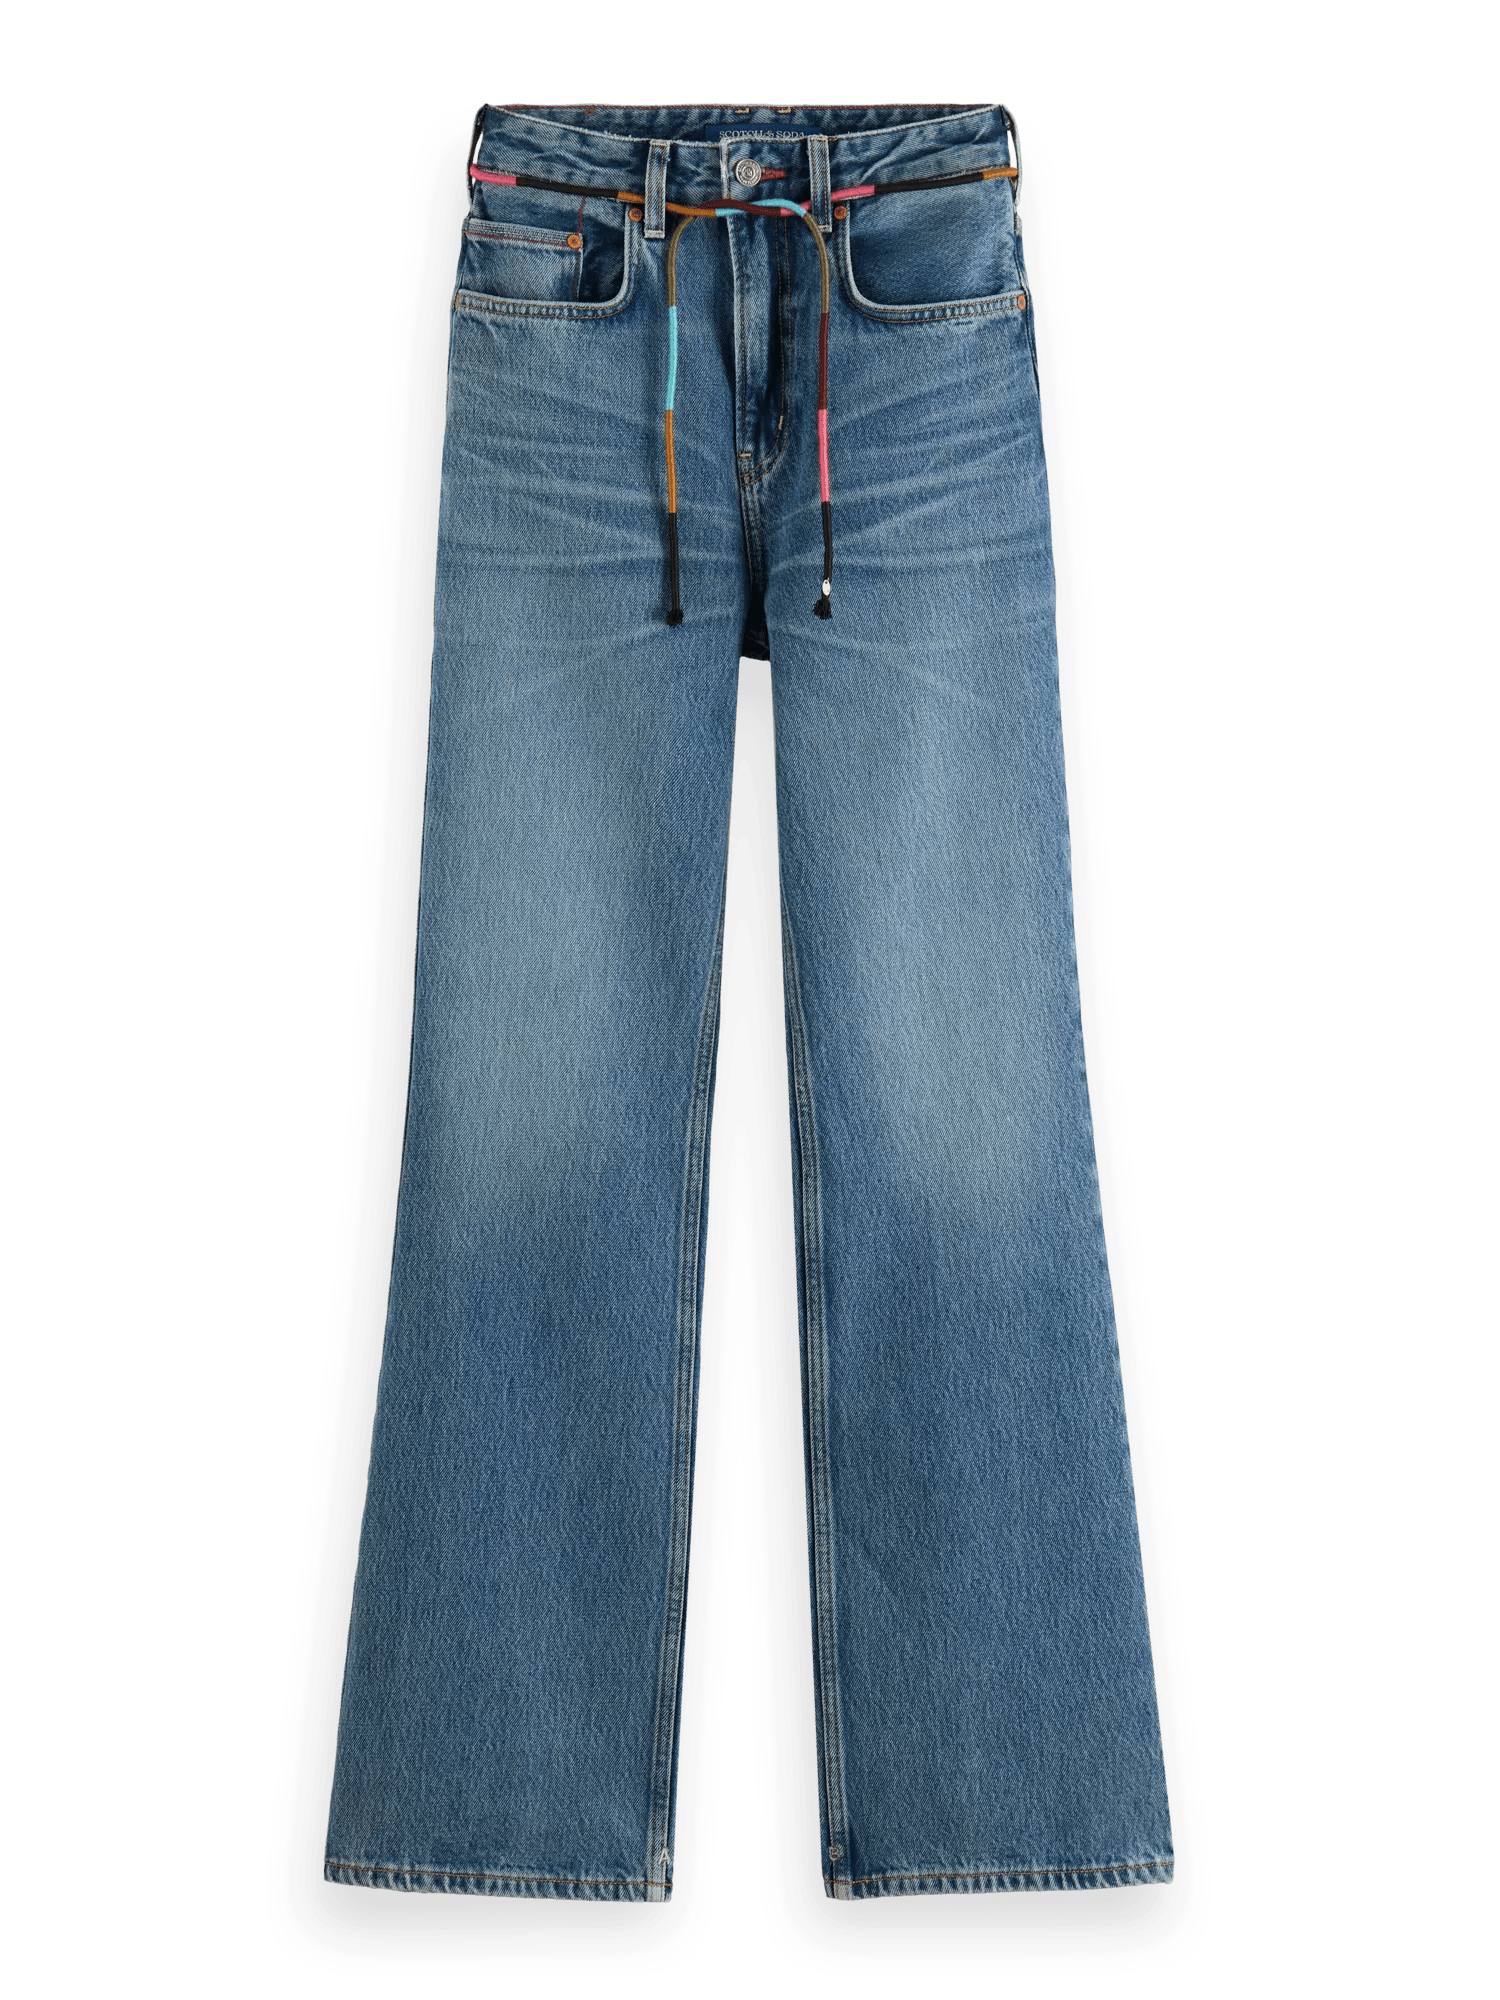 The Glow high-rise bootcut jeans